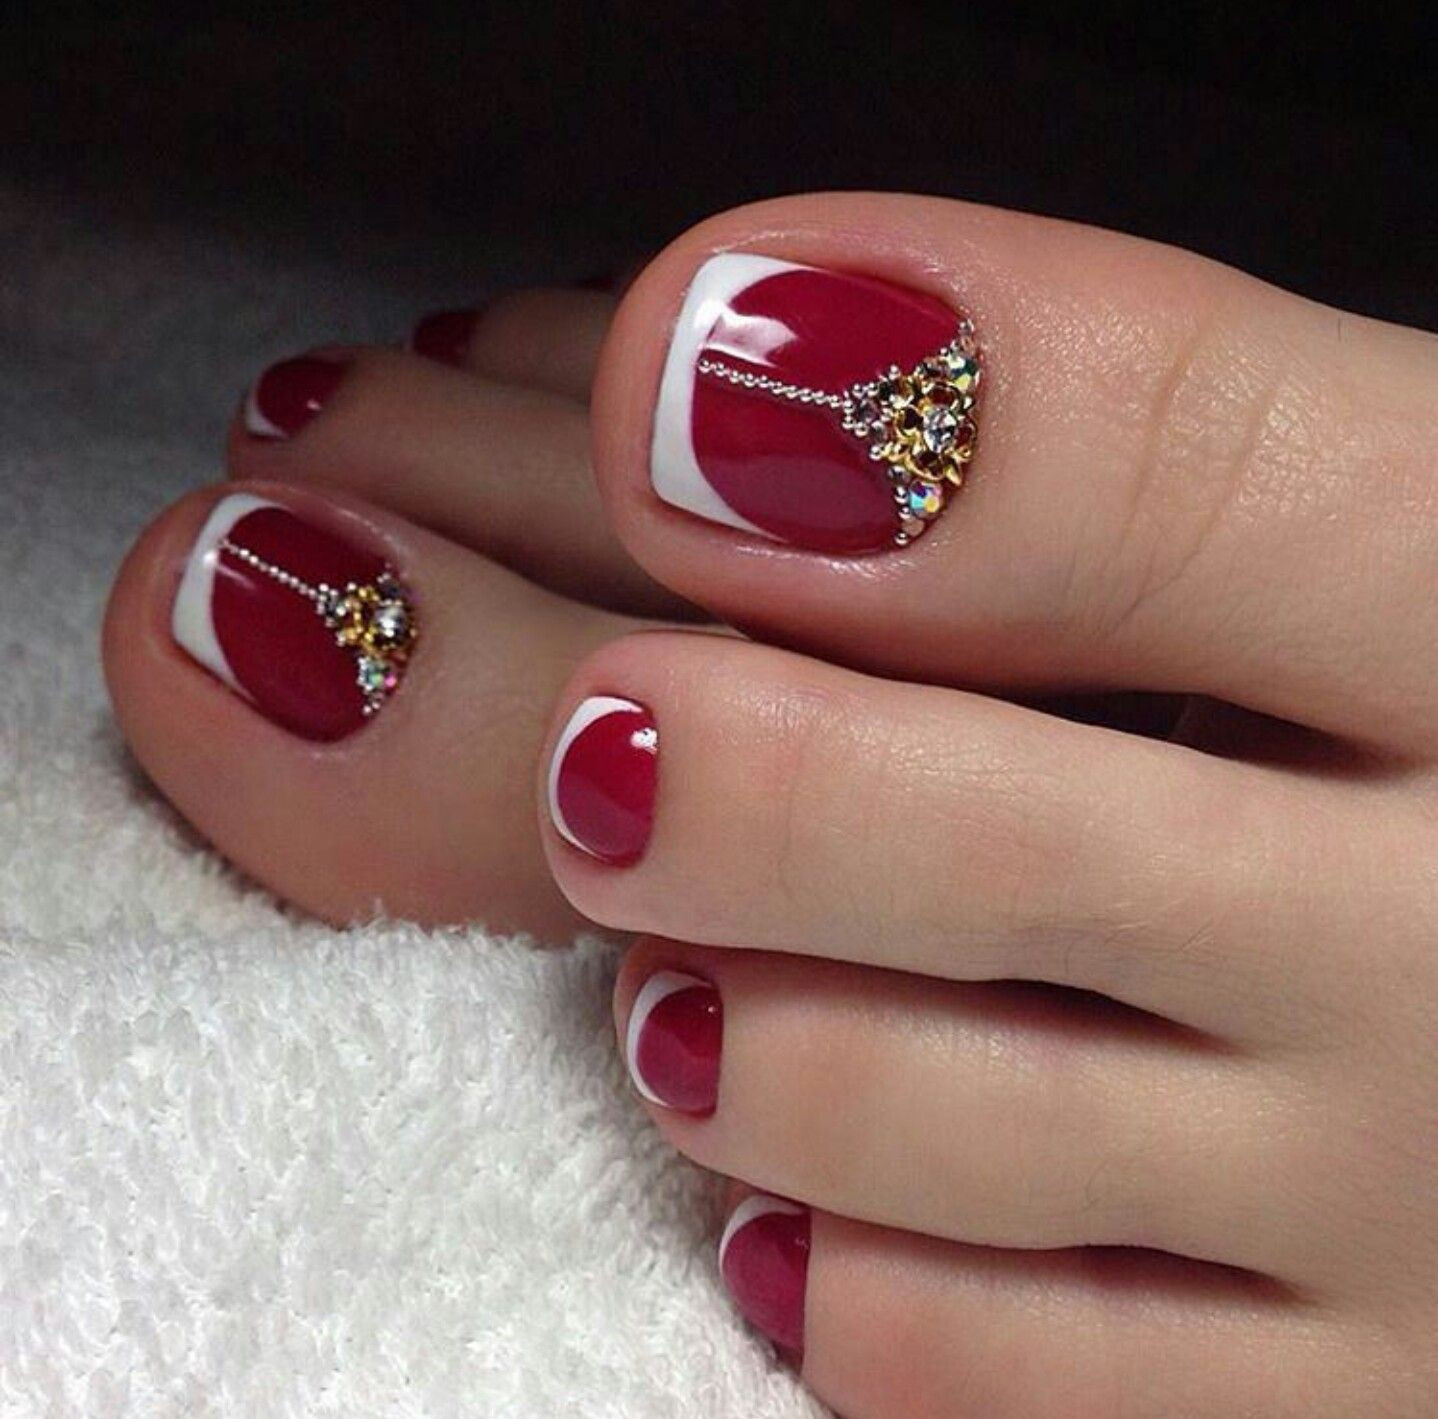 White Tip Toe Nail Designs
 Red toe nails with white french tip and rhinestones